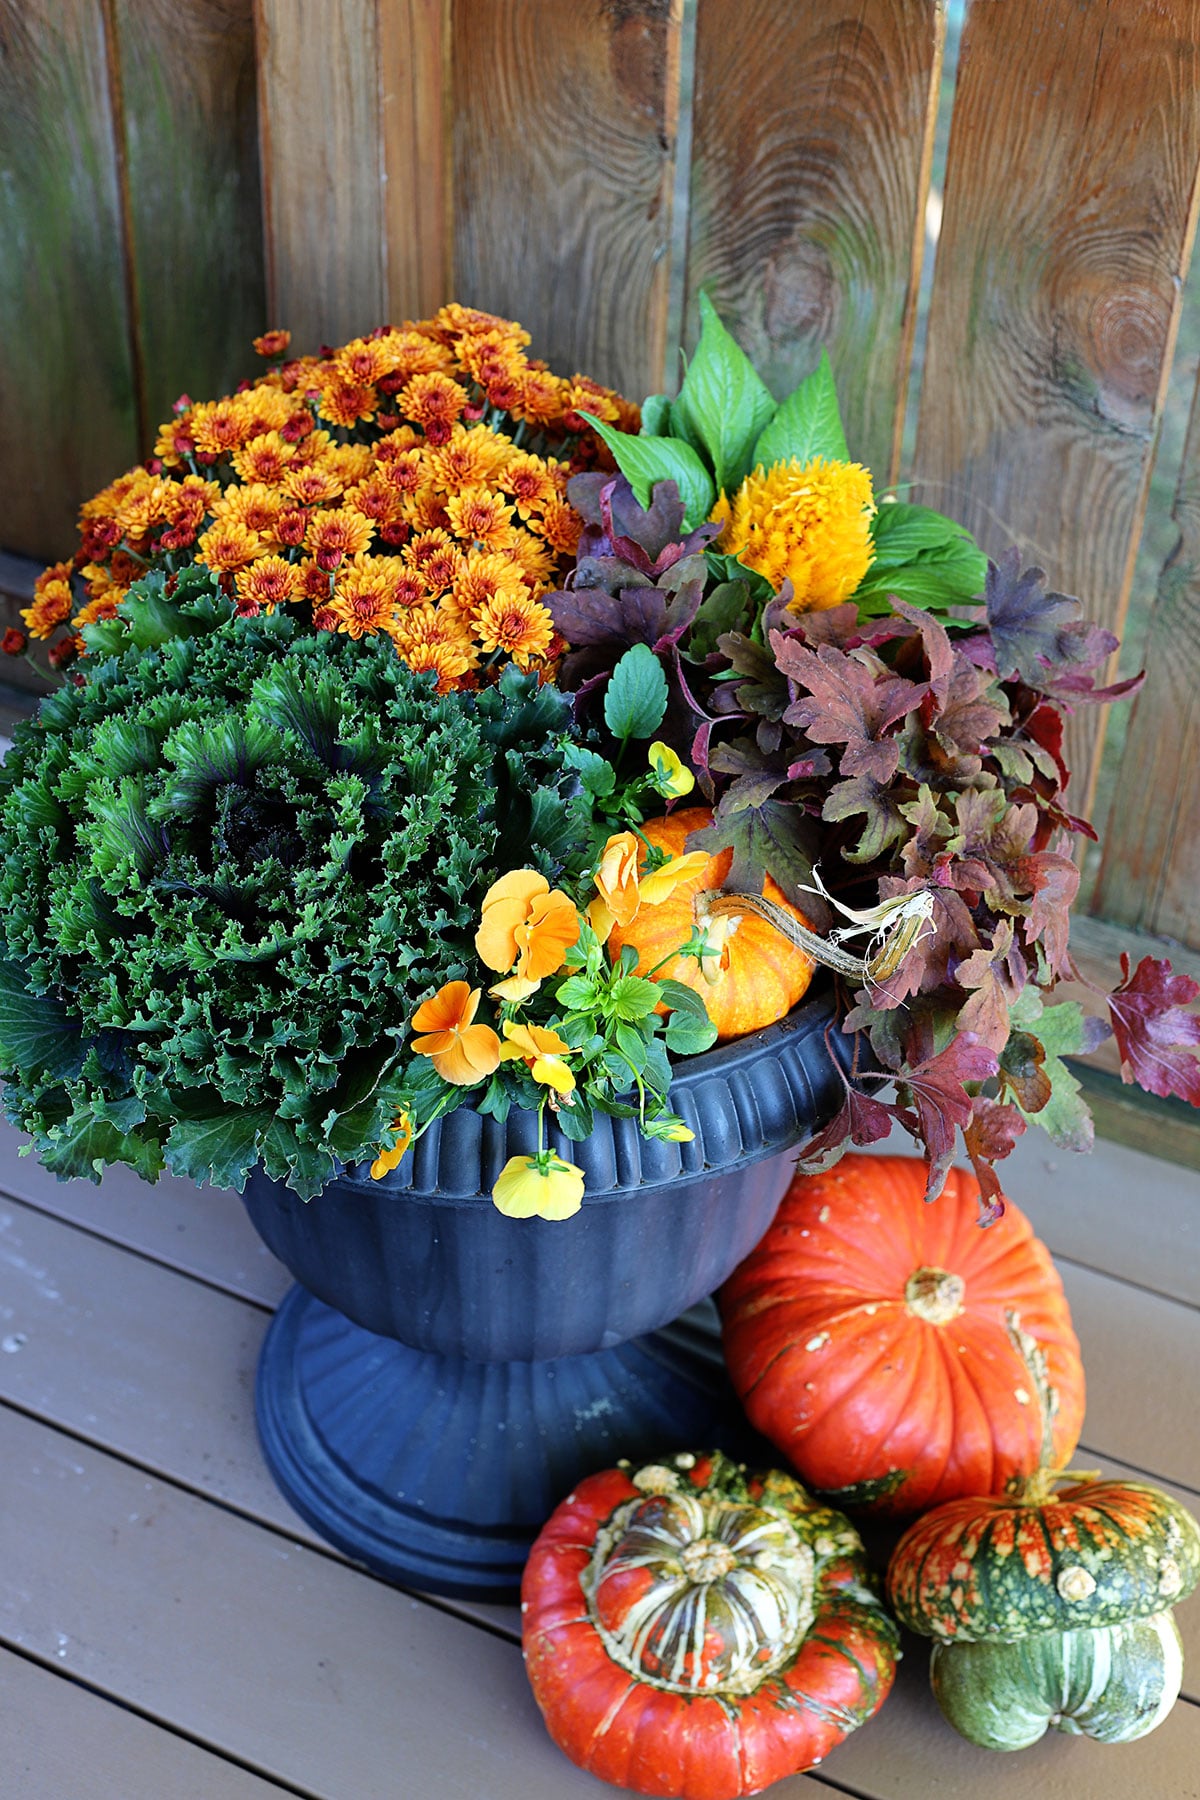 Fall planter for your porch or patio using traditional orange and yellow fall colors.